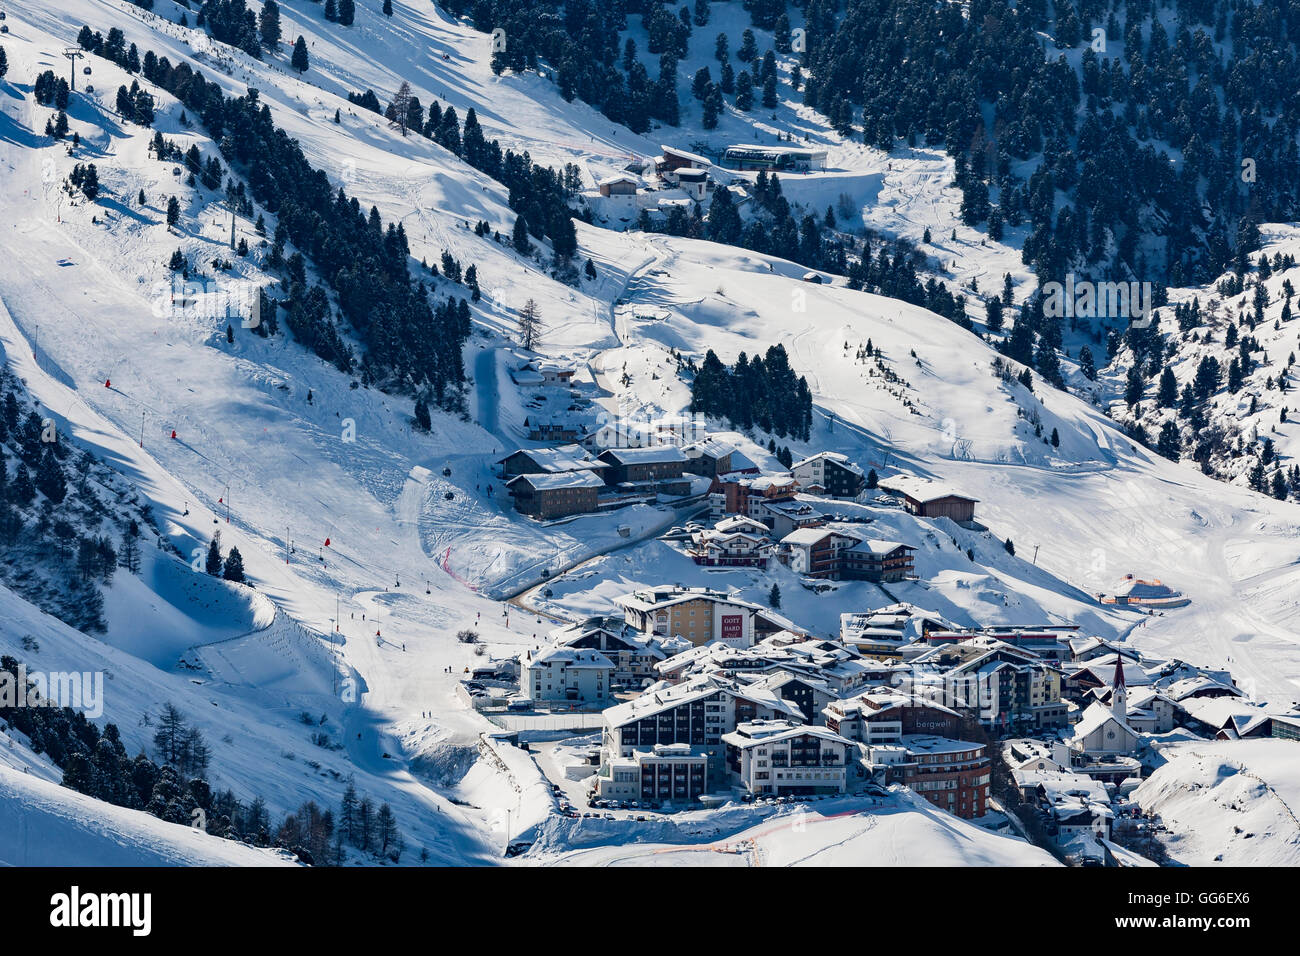 The Austrian skiing village of Obergurgl covered in winter snow at the end of the Otztal valley, Tyrol, Austria, Europe Stock Photo